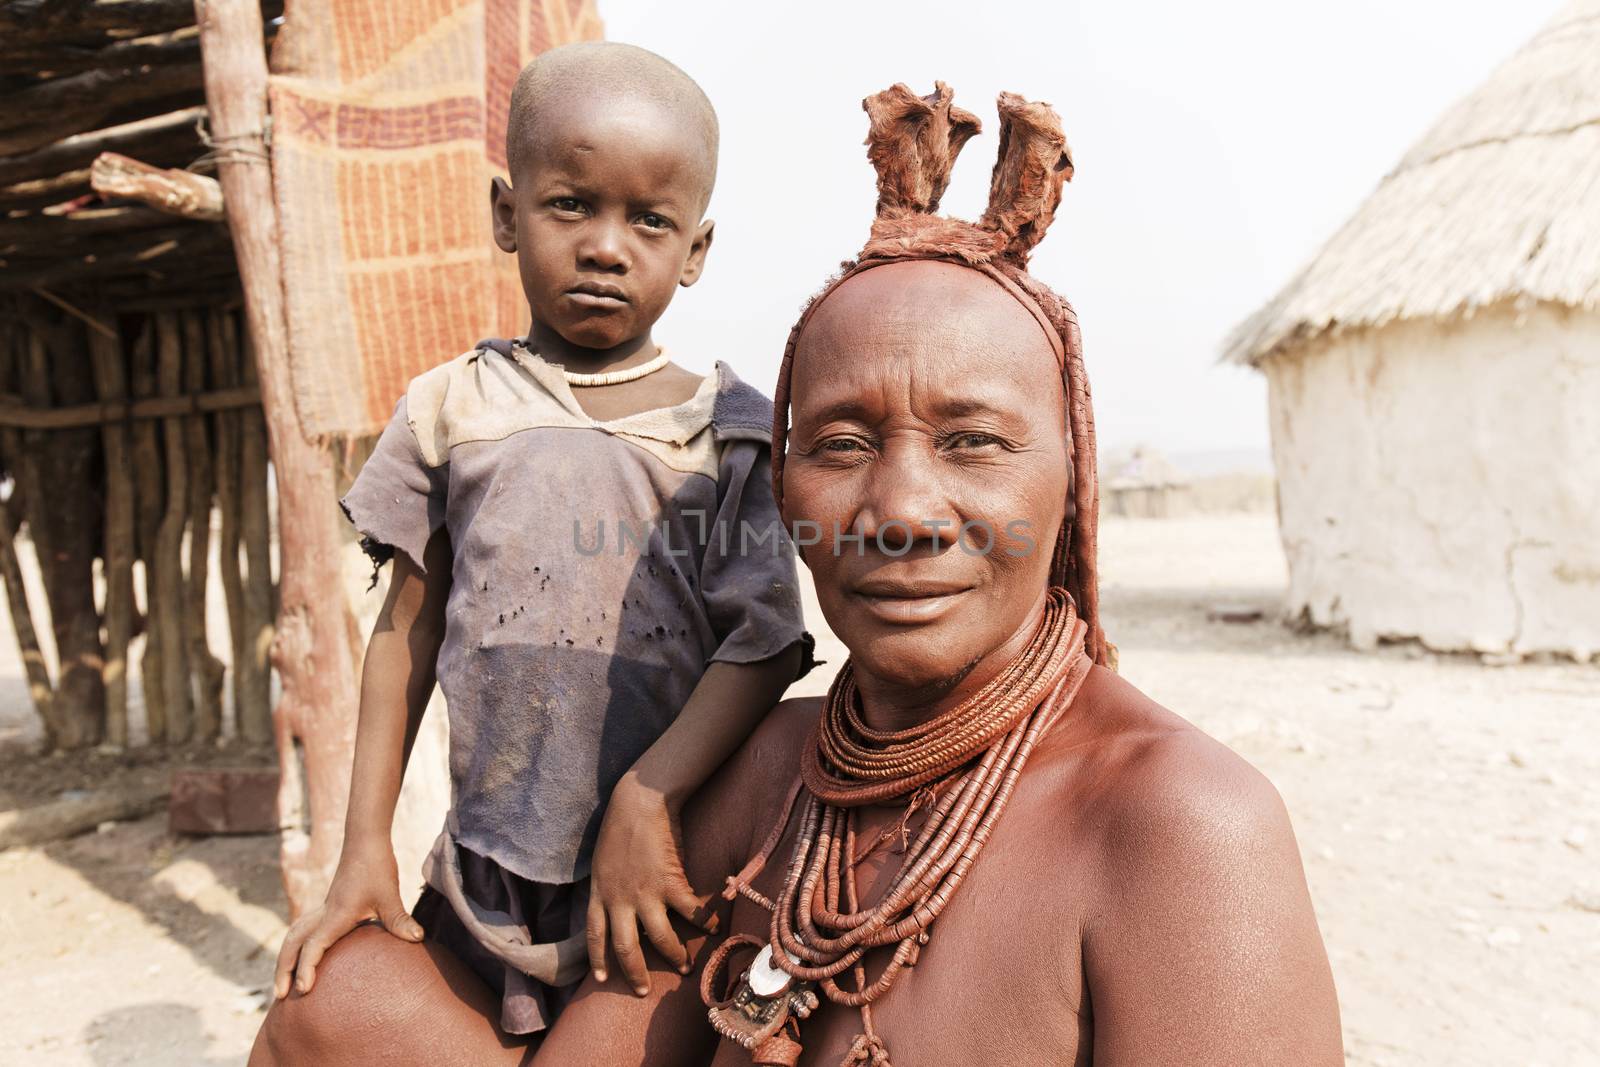 Himba woman with her small son smiling to the camera in the vill by Tjeerdkruse